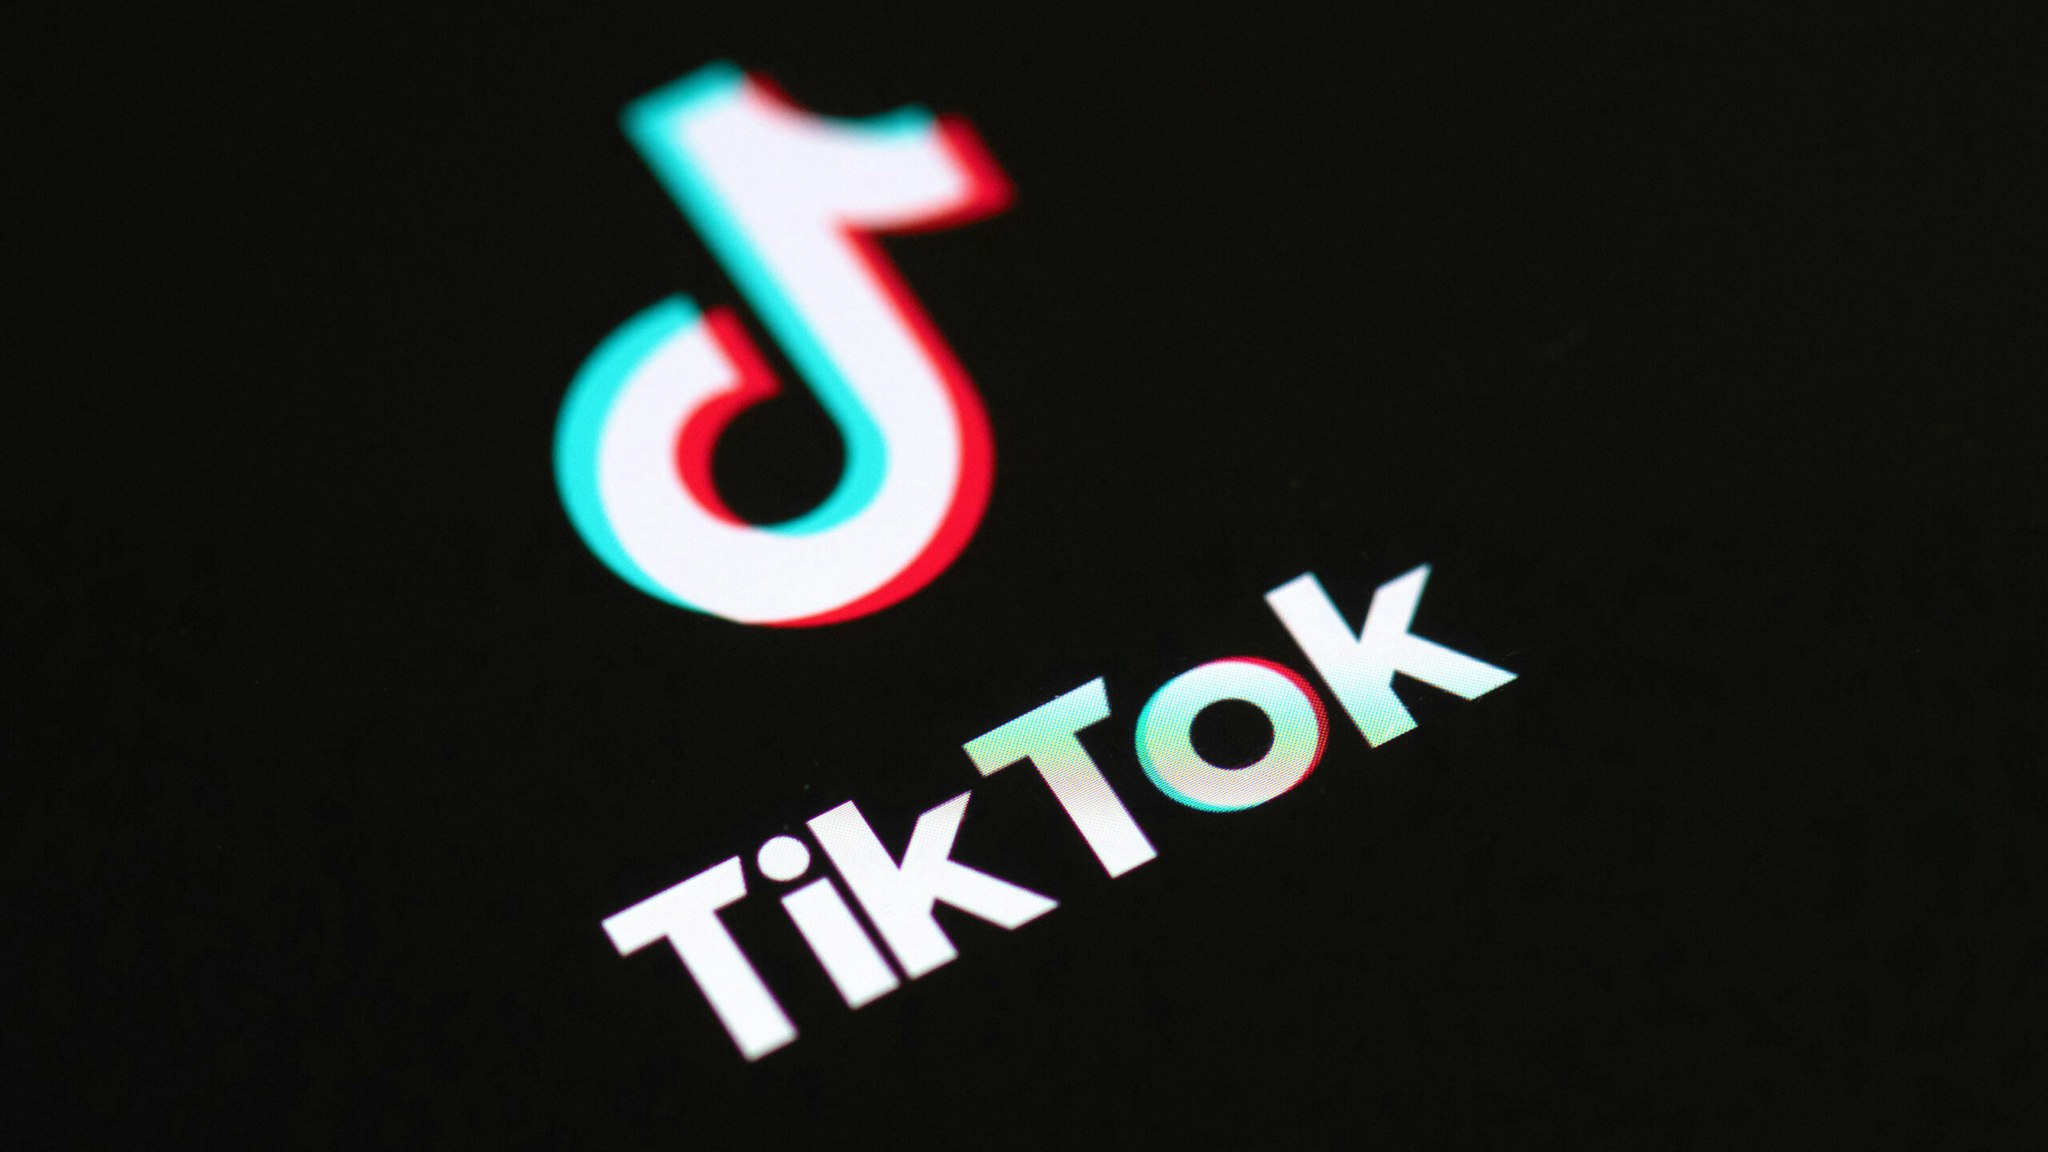 This illustration picture taken on May 27, 2020 in Paris shows the logo of the social network application Tik Tok on the screen of a phone.